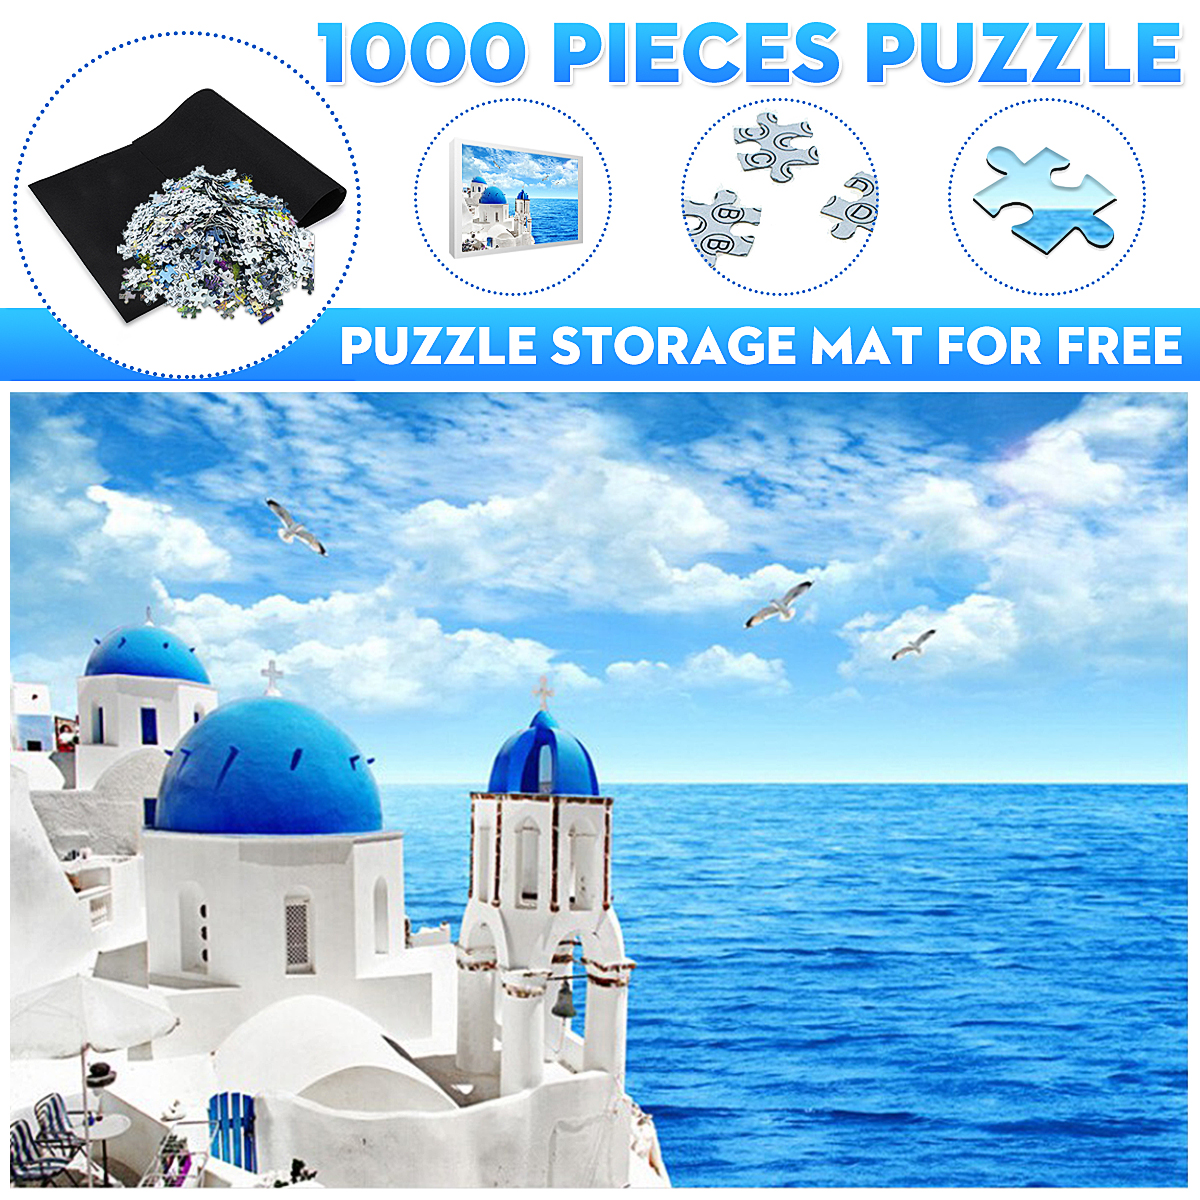 1000-Pieces-Jigsaw-Puzzle-Toy-DIY-Assembly-Paper-Puzzle-Beautiful-Building-Landscape-Educational-Toy-1685521-2